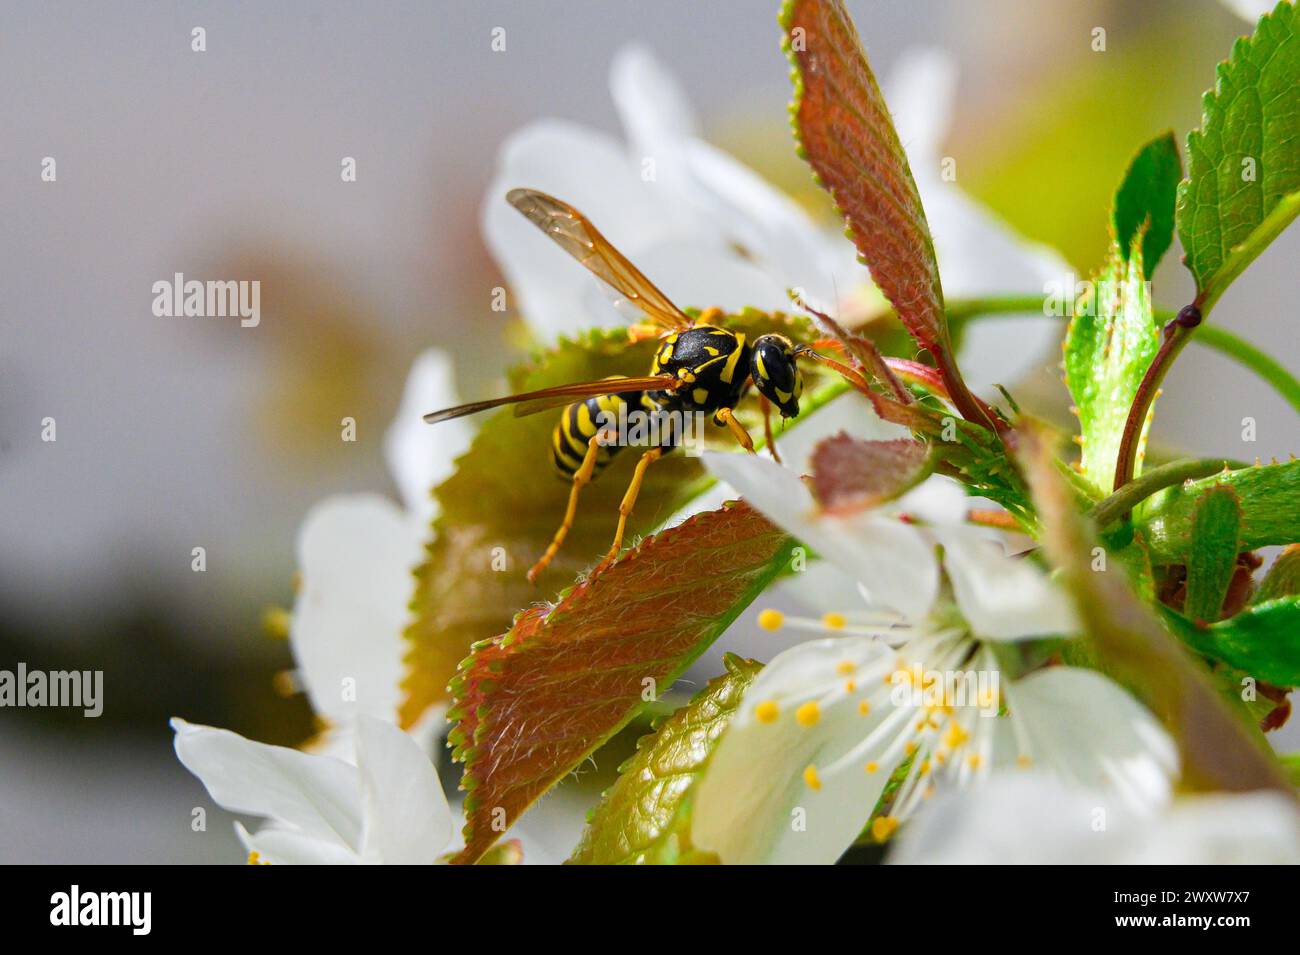 Wasp on a cherry blossom Stock Photo